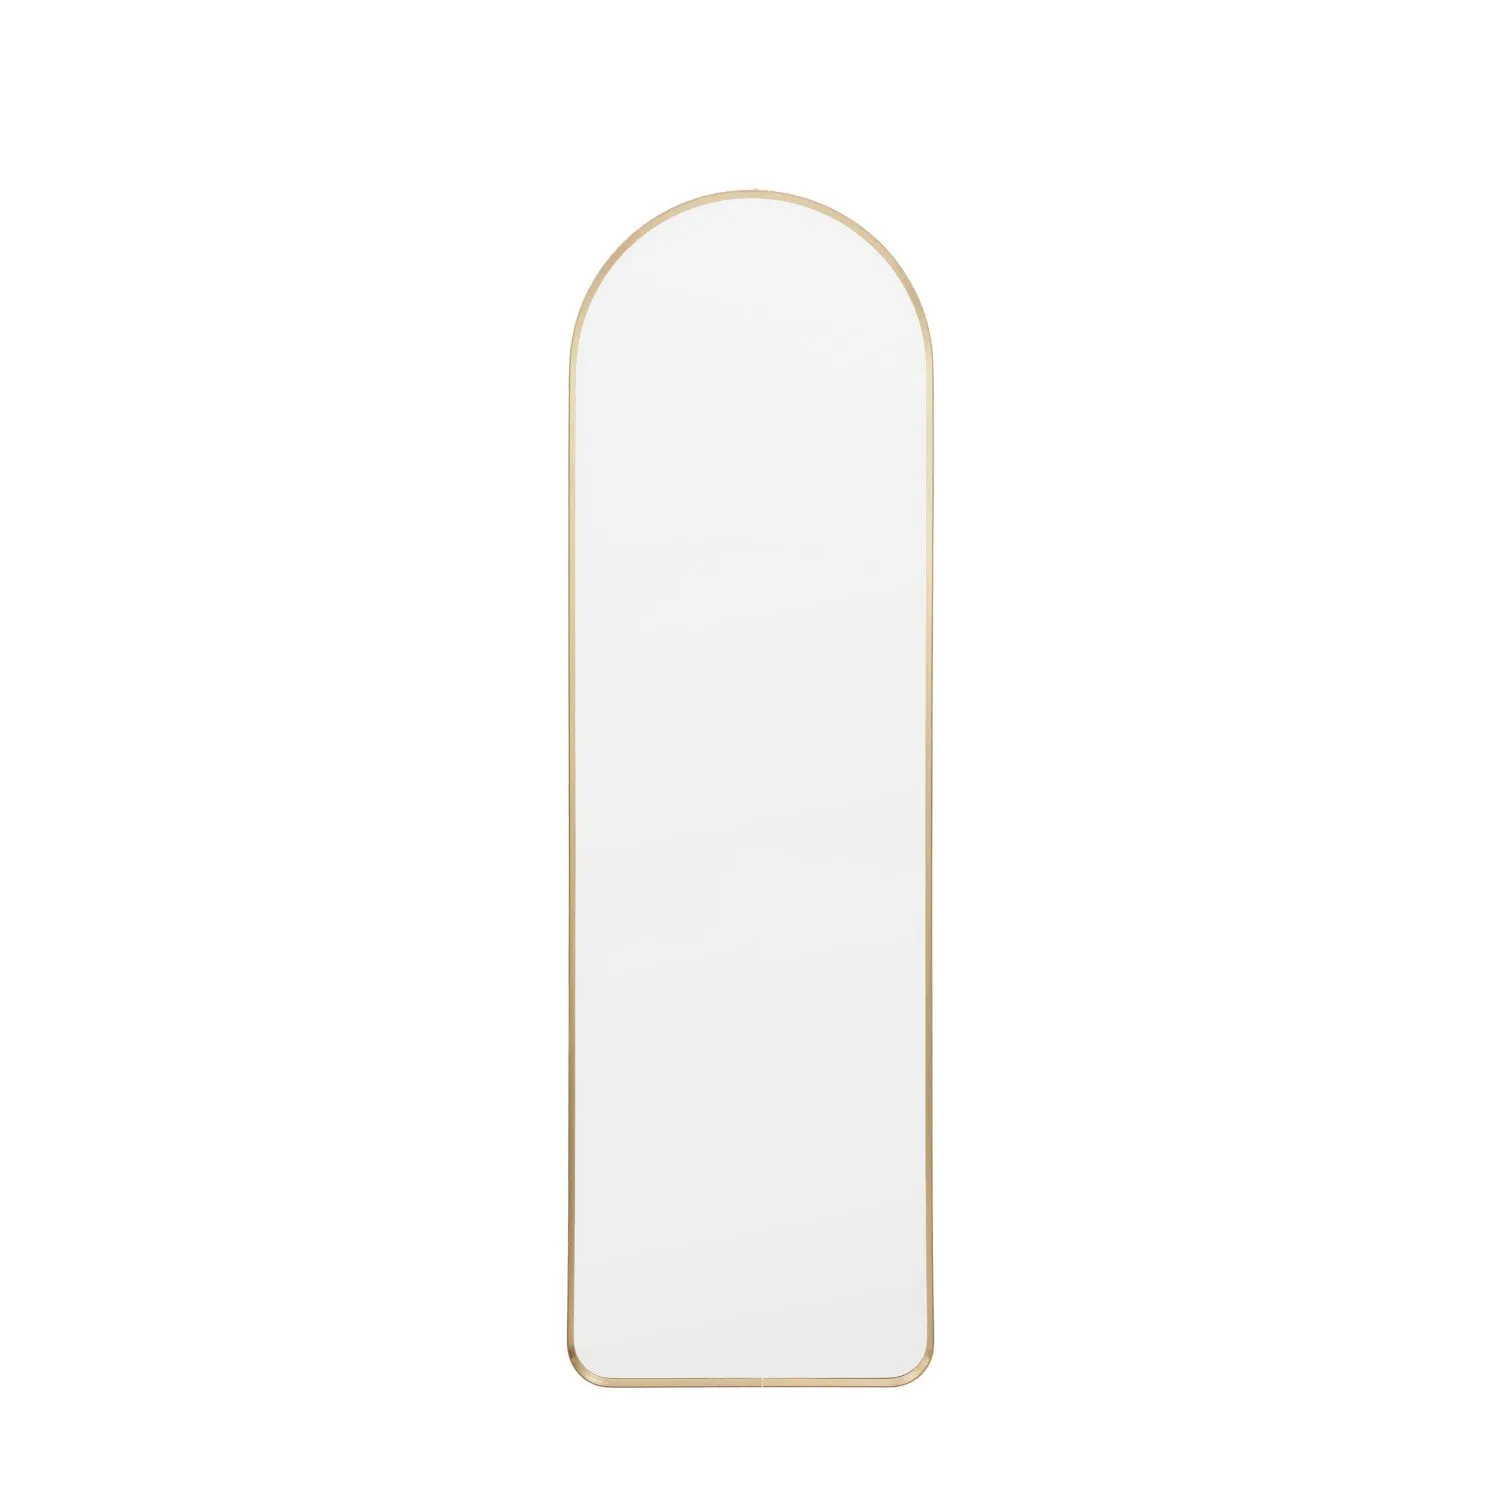 Glass Size mm W450 x H1500 Arch Mirror Gold